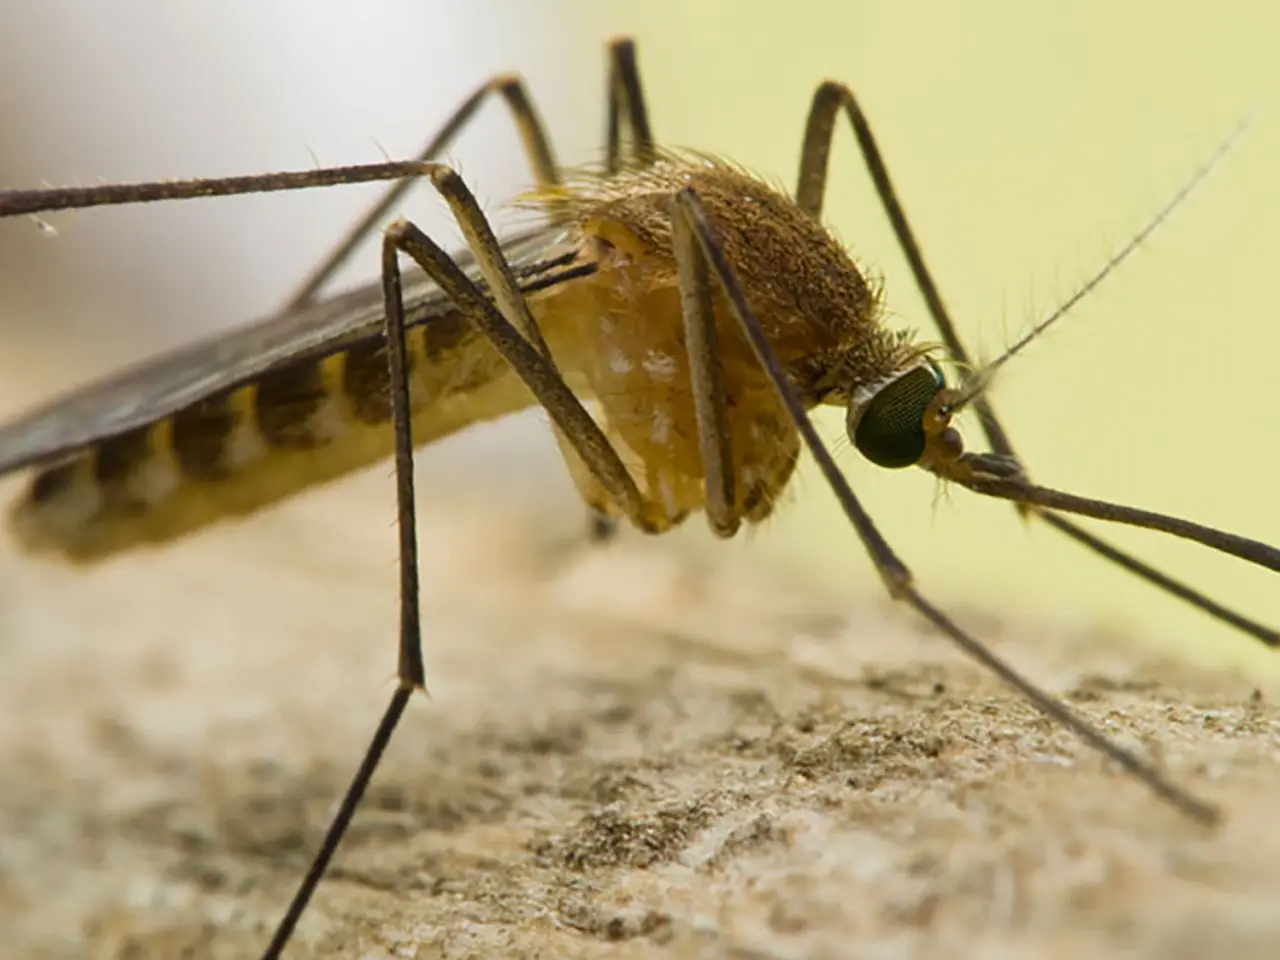 Close up image of an adult mosquito